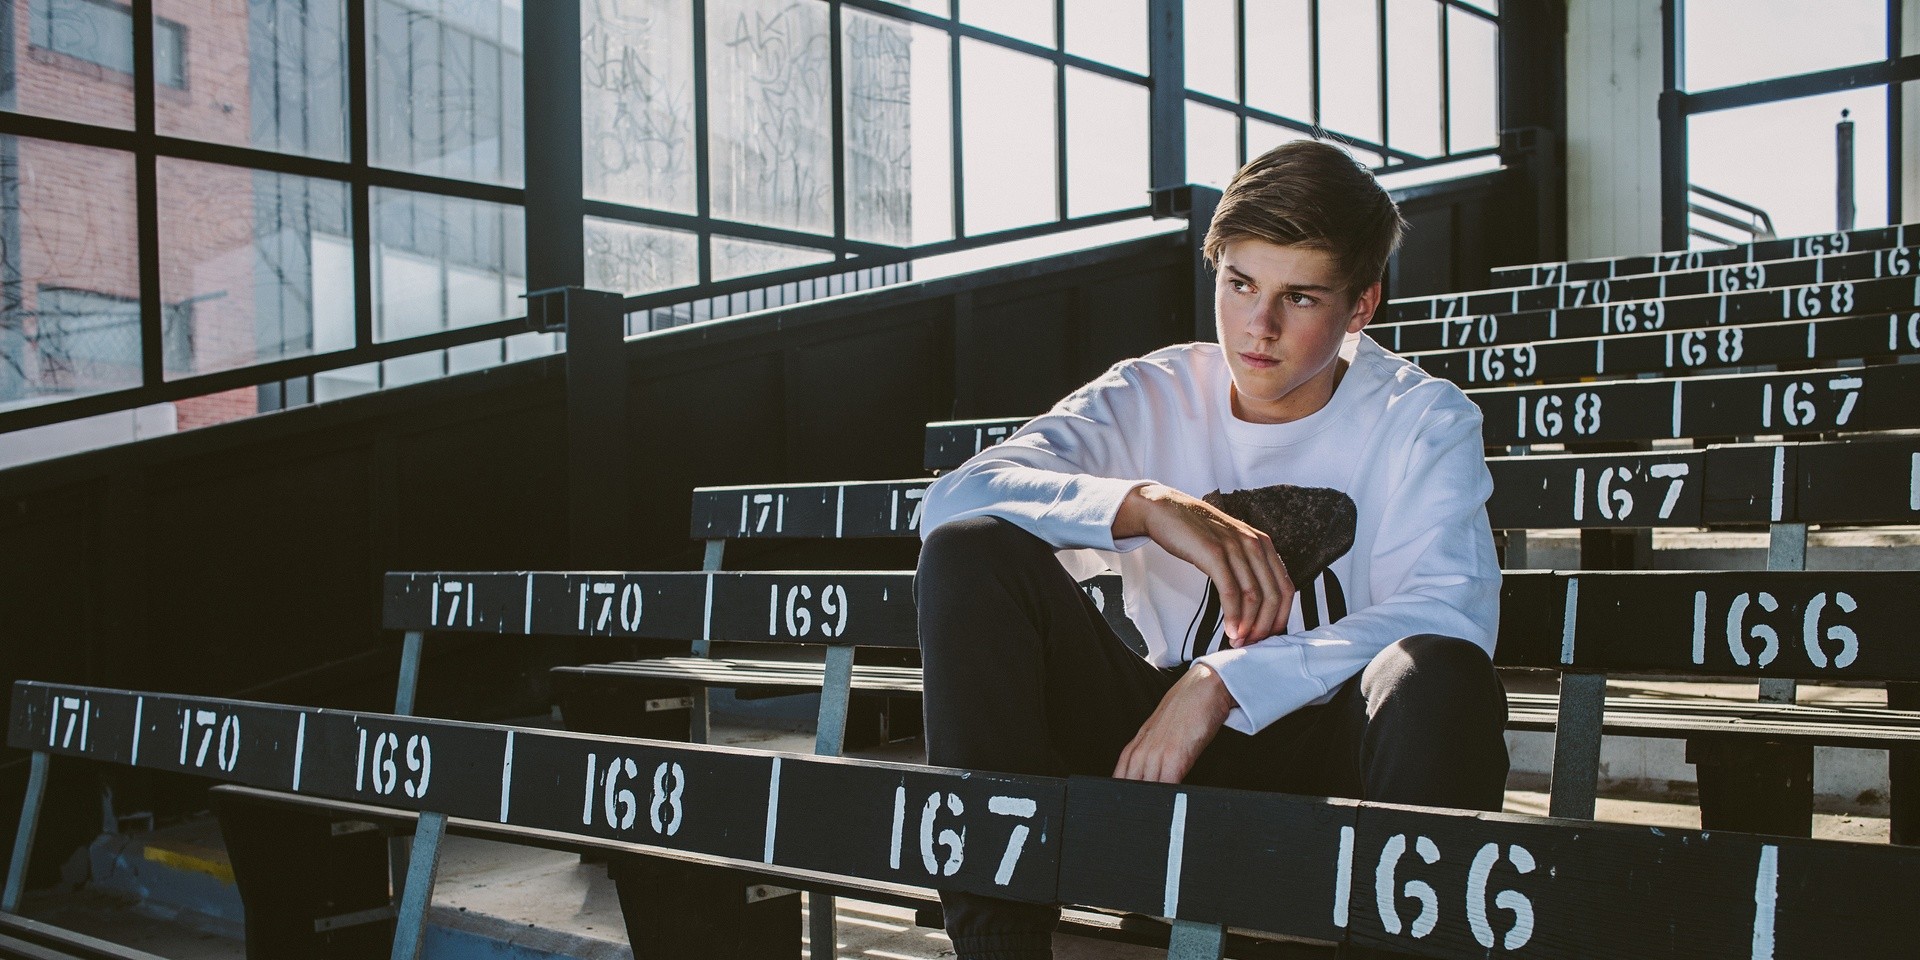 "I've always liked to make music that I'd listen to": An interview with Ruel